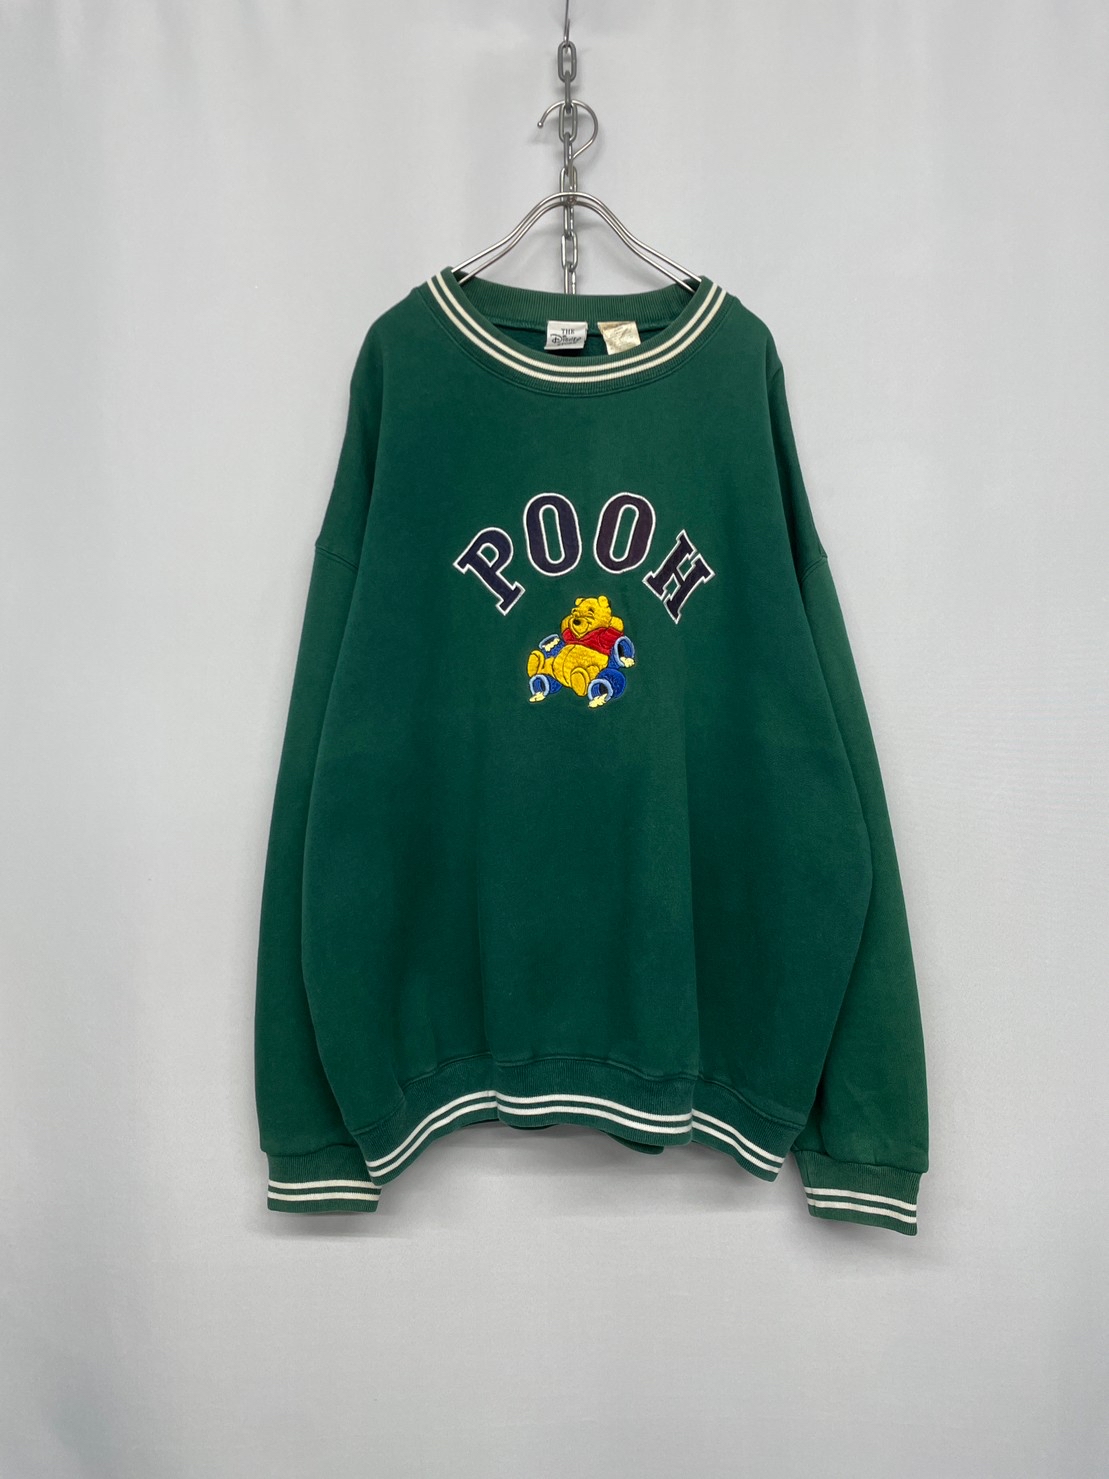 90’s “Pooh” Embroidered Sweat Shirt